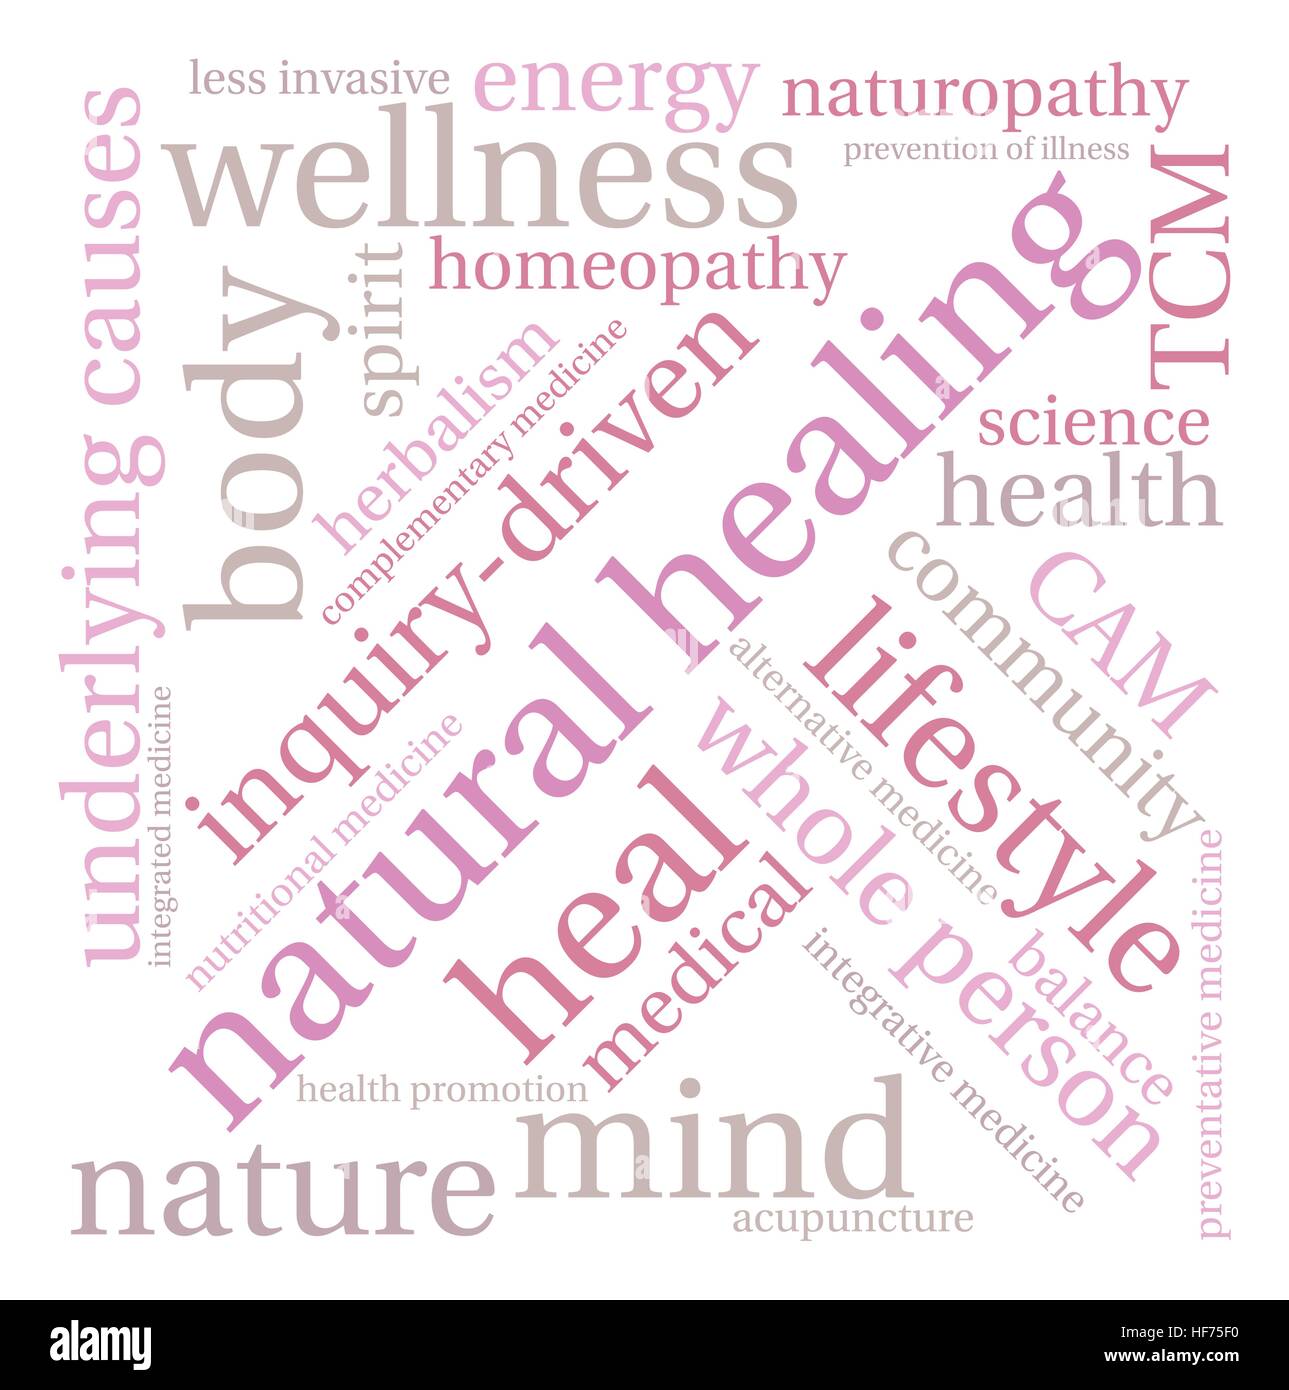 Natural Healing word cloud on a white background. Stock Vector